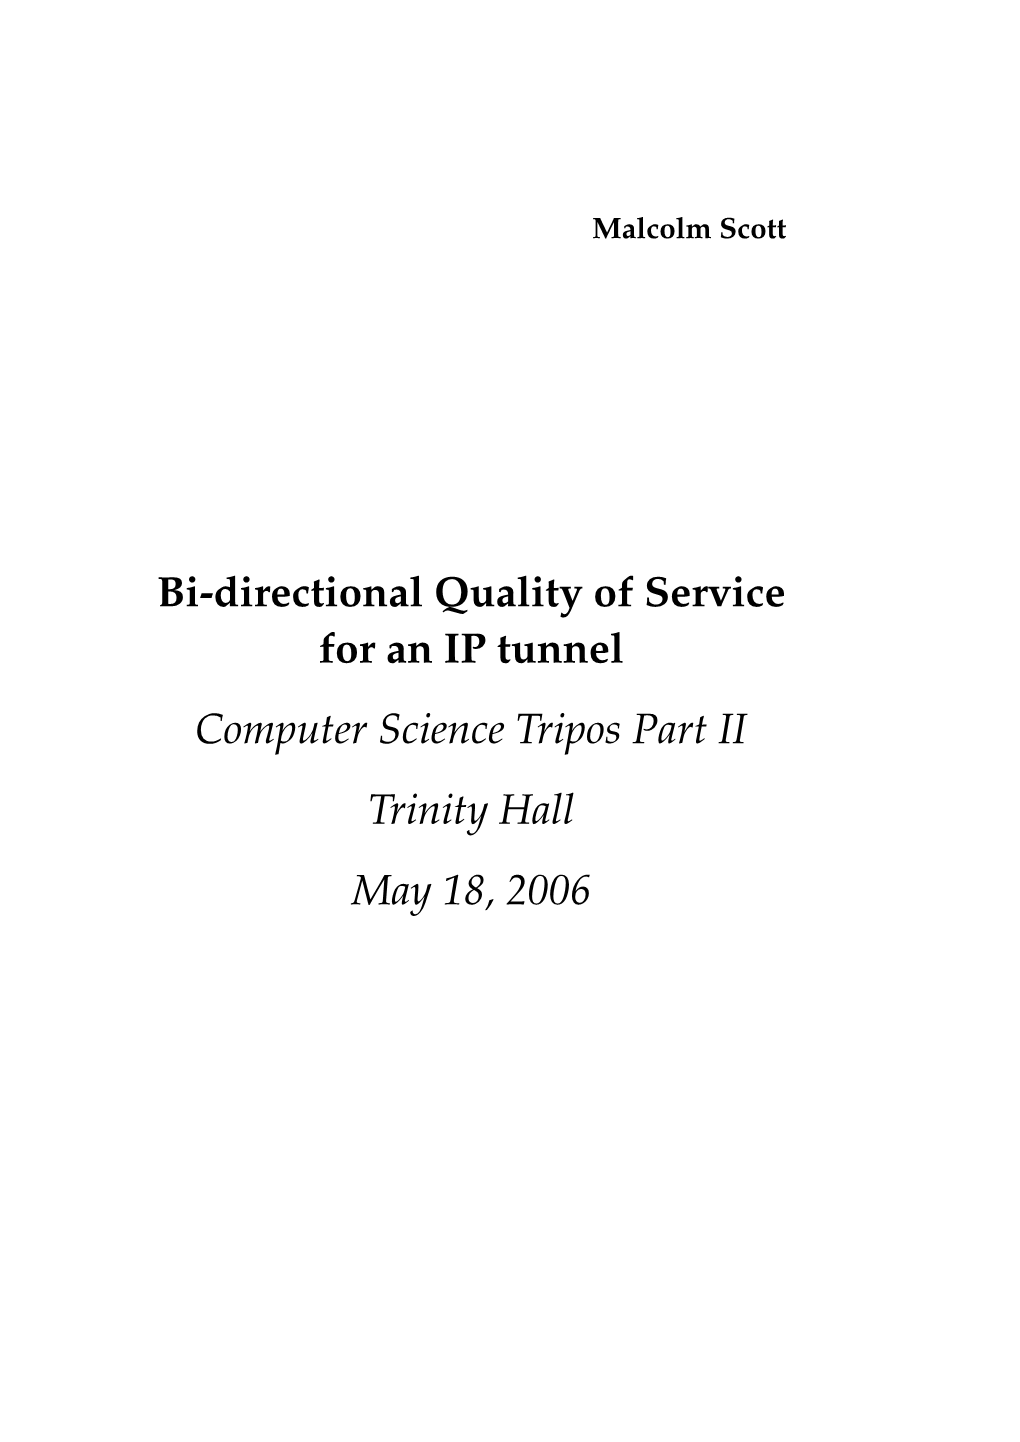 Bi-Directional Quality of Service for an IP Tunnel Computer Science Tripos Part II Trinity Hall May 18, 2006